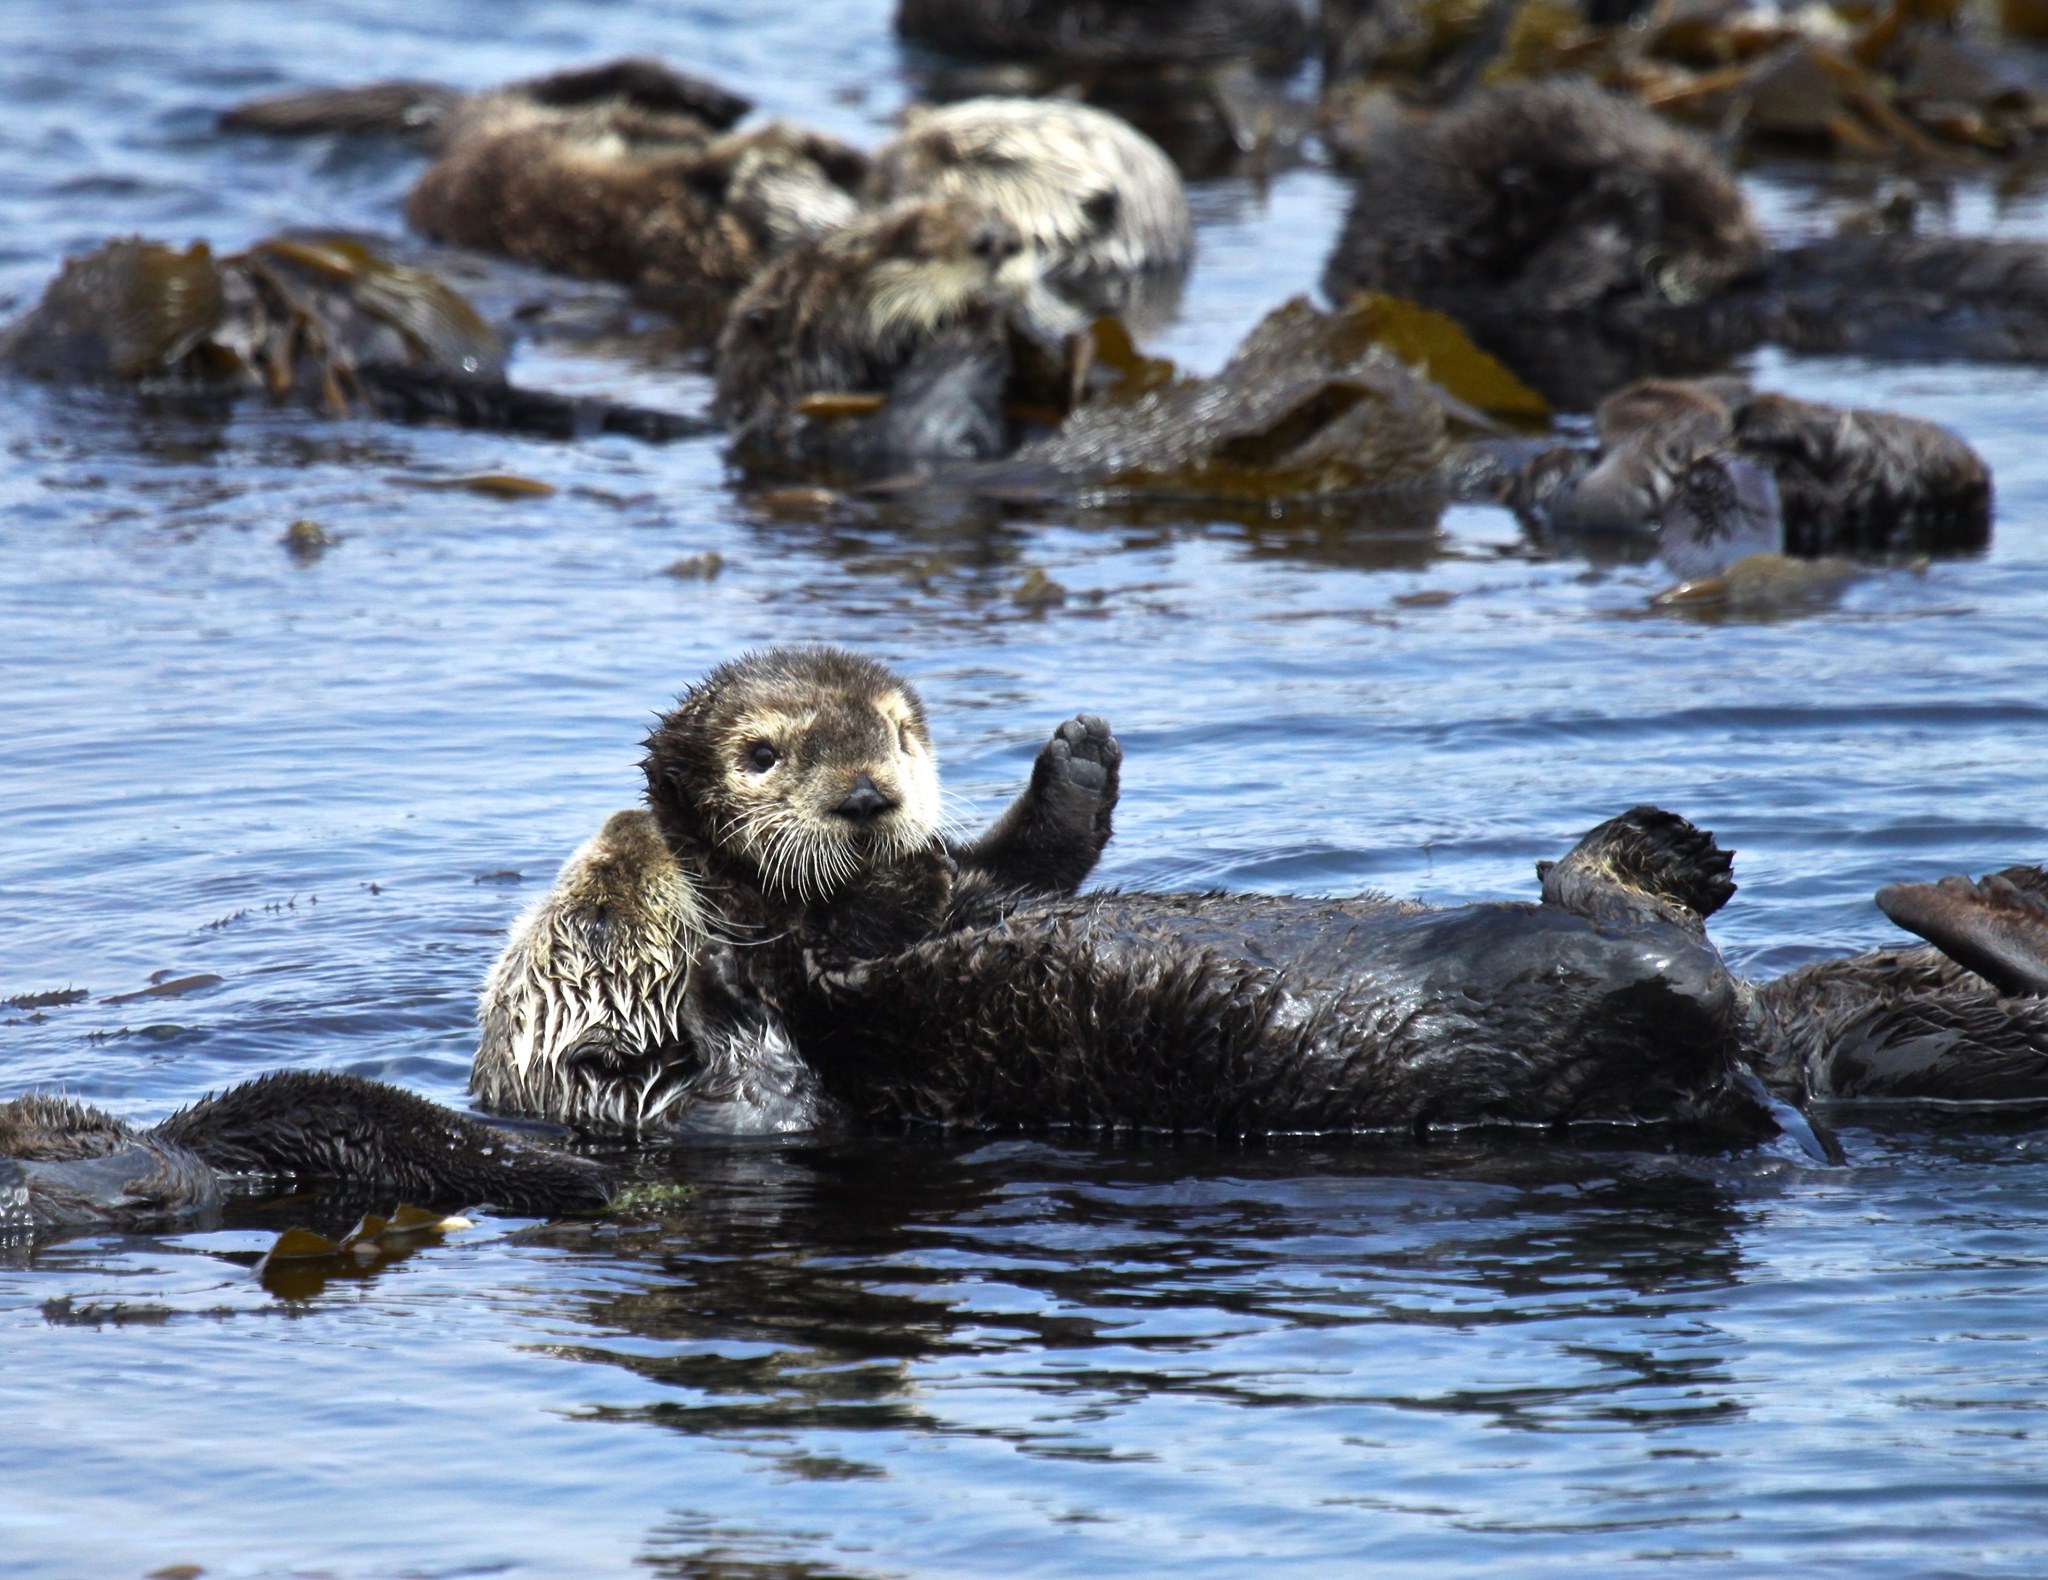 mother-sea-otter-carries-pup-photo-by-lilian-carswell-u.s.-fish-and-wildlife-service.jpg